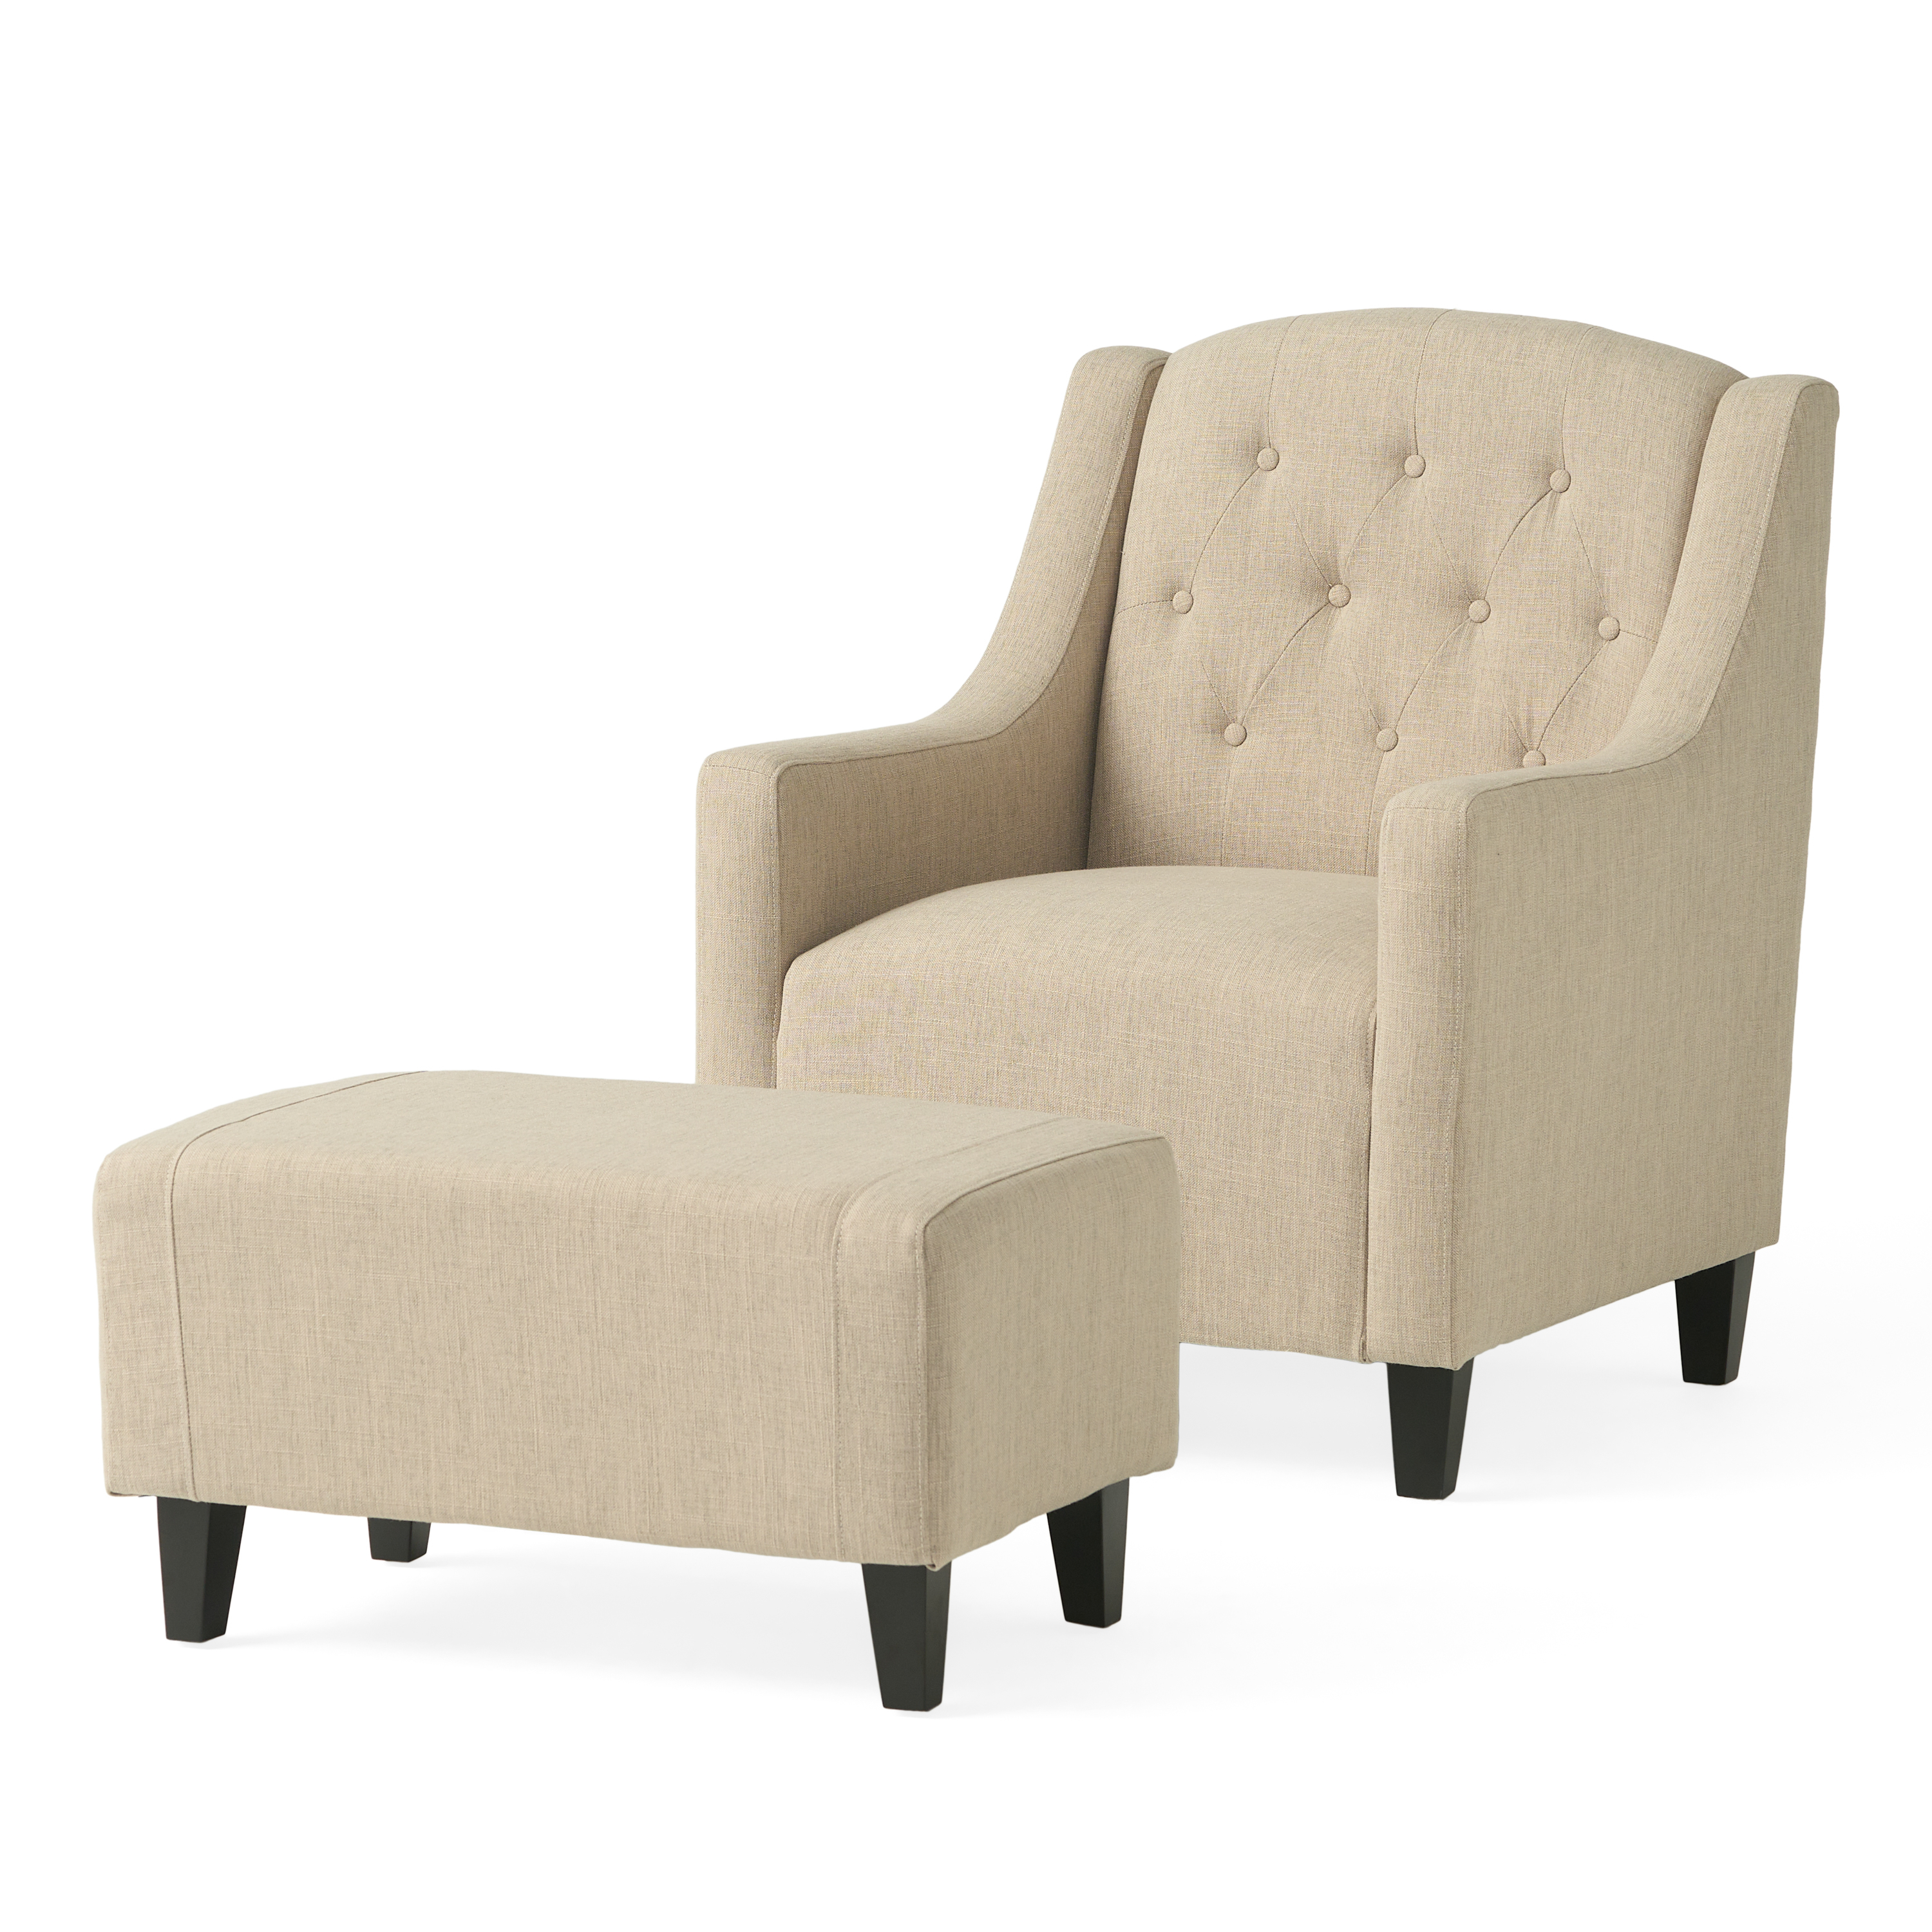 Empierre Fabric Club Chair And Ottoman - Light Beige